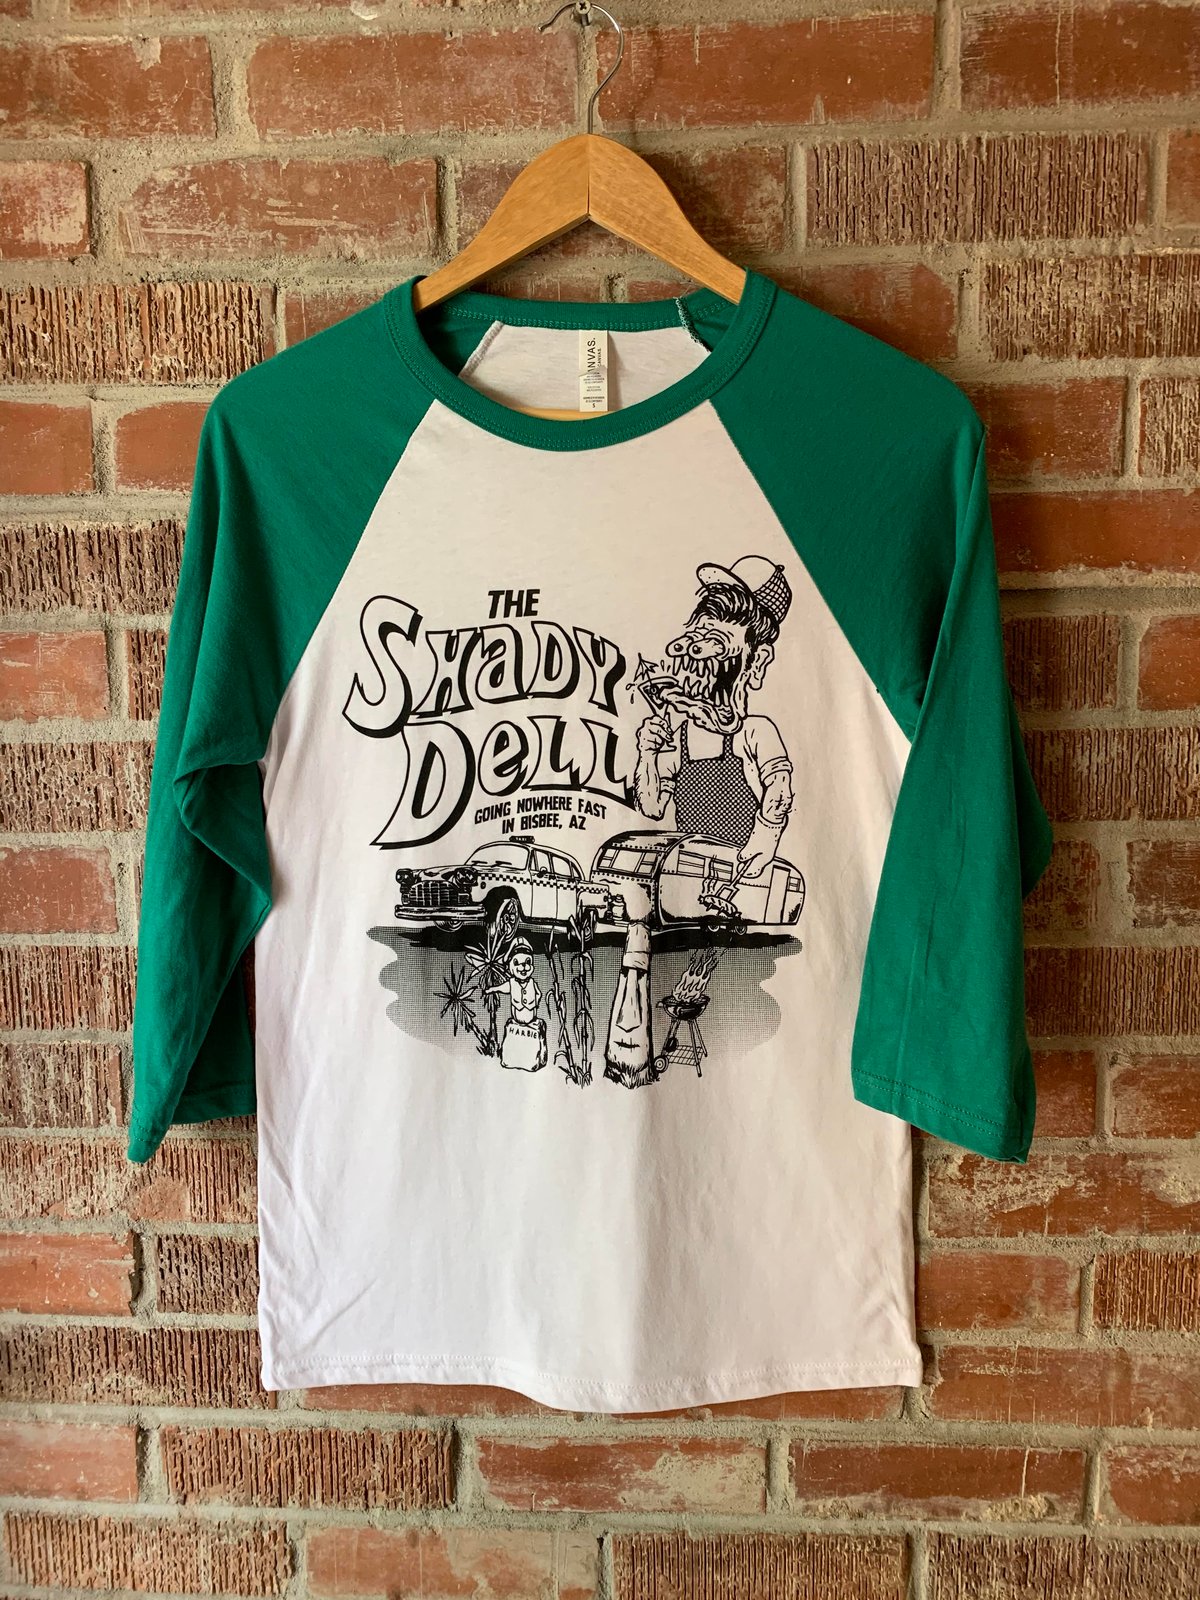 Raglan Baseball Tee with NEW Design and Green Sleeves / The Shady Dell